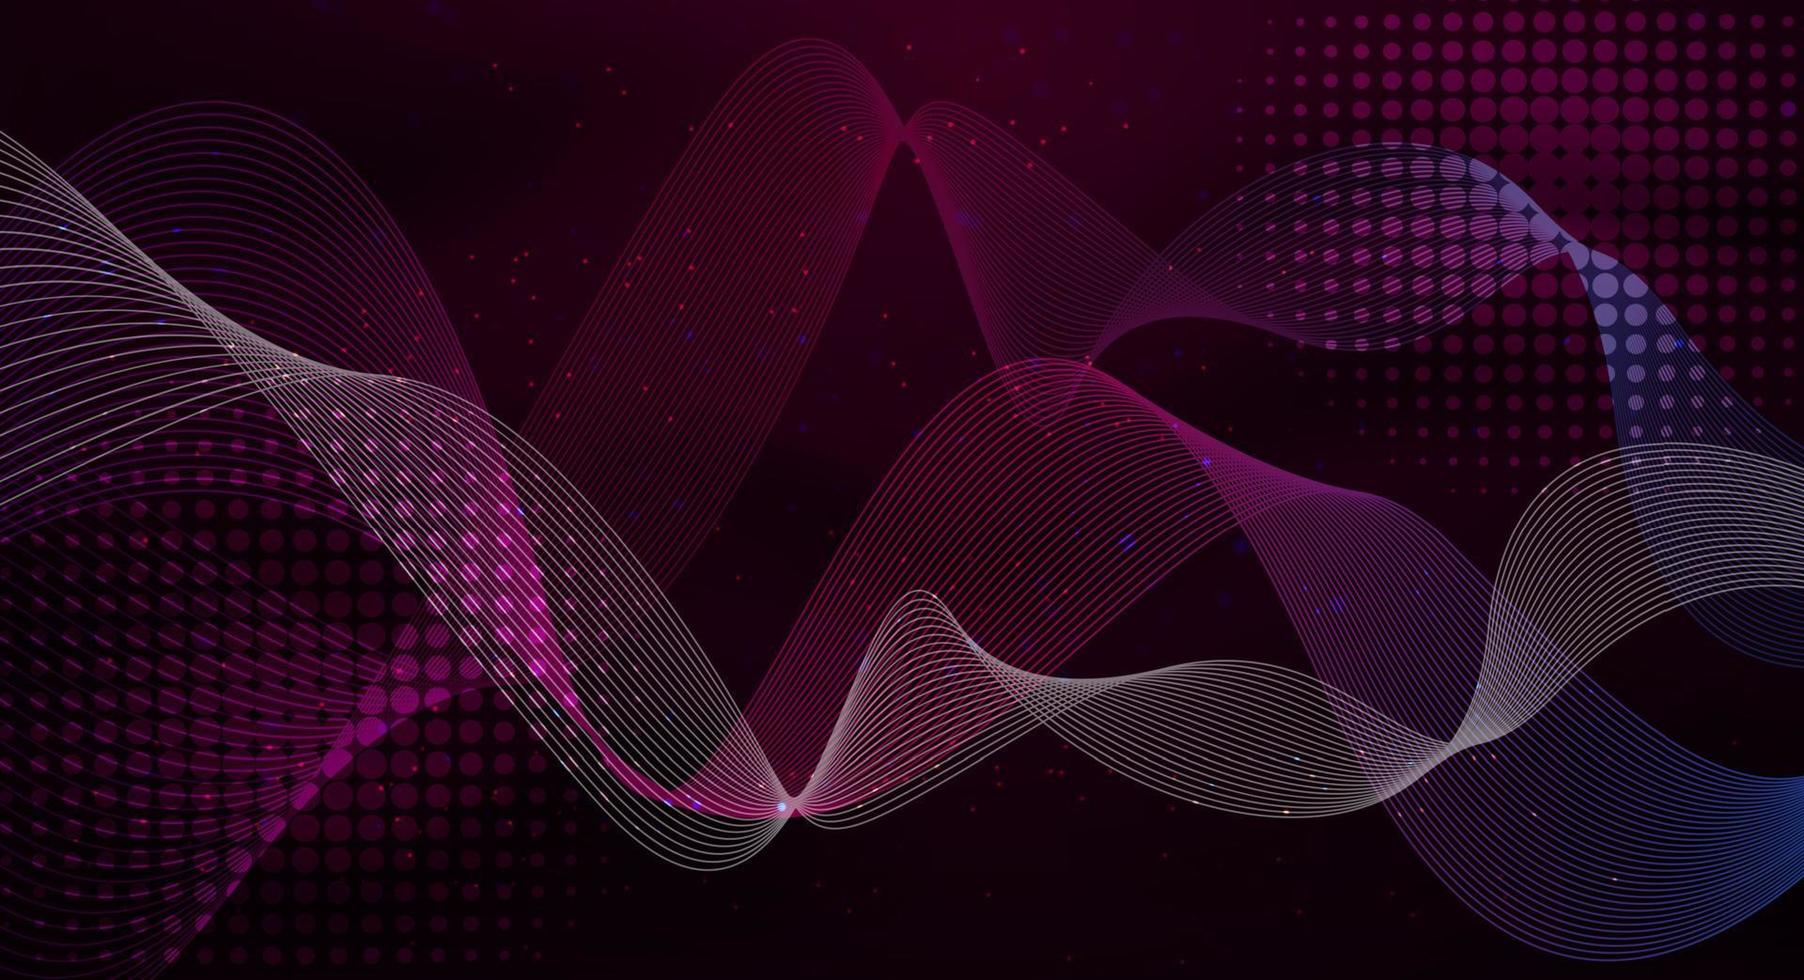 Gradient wave abstract background vector with purple color. Suitable for night party theme.